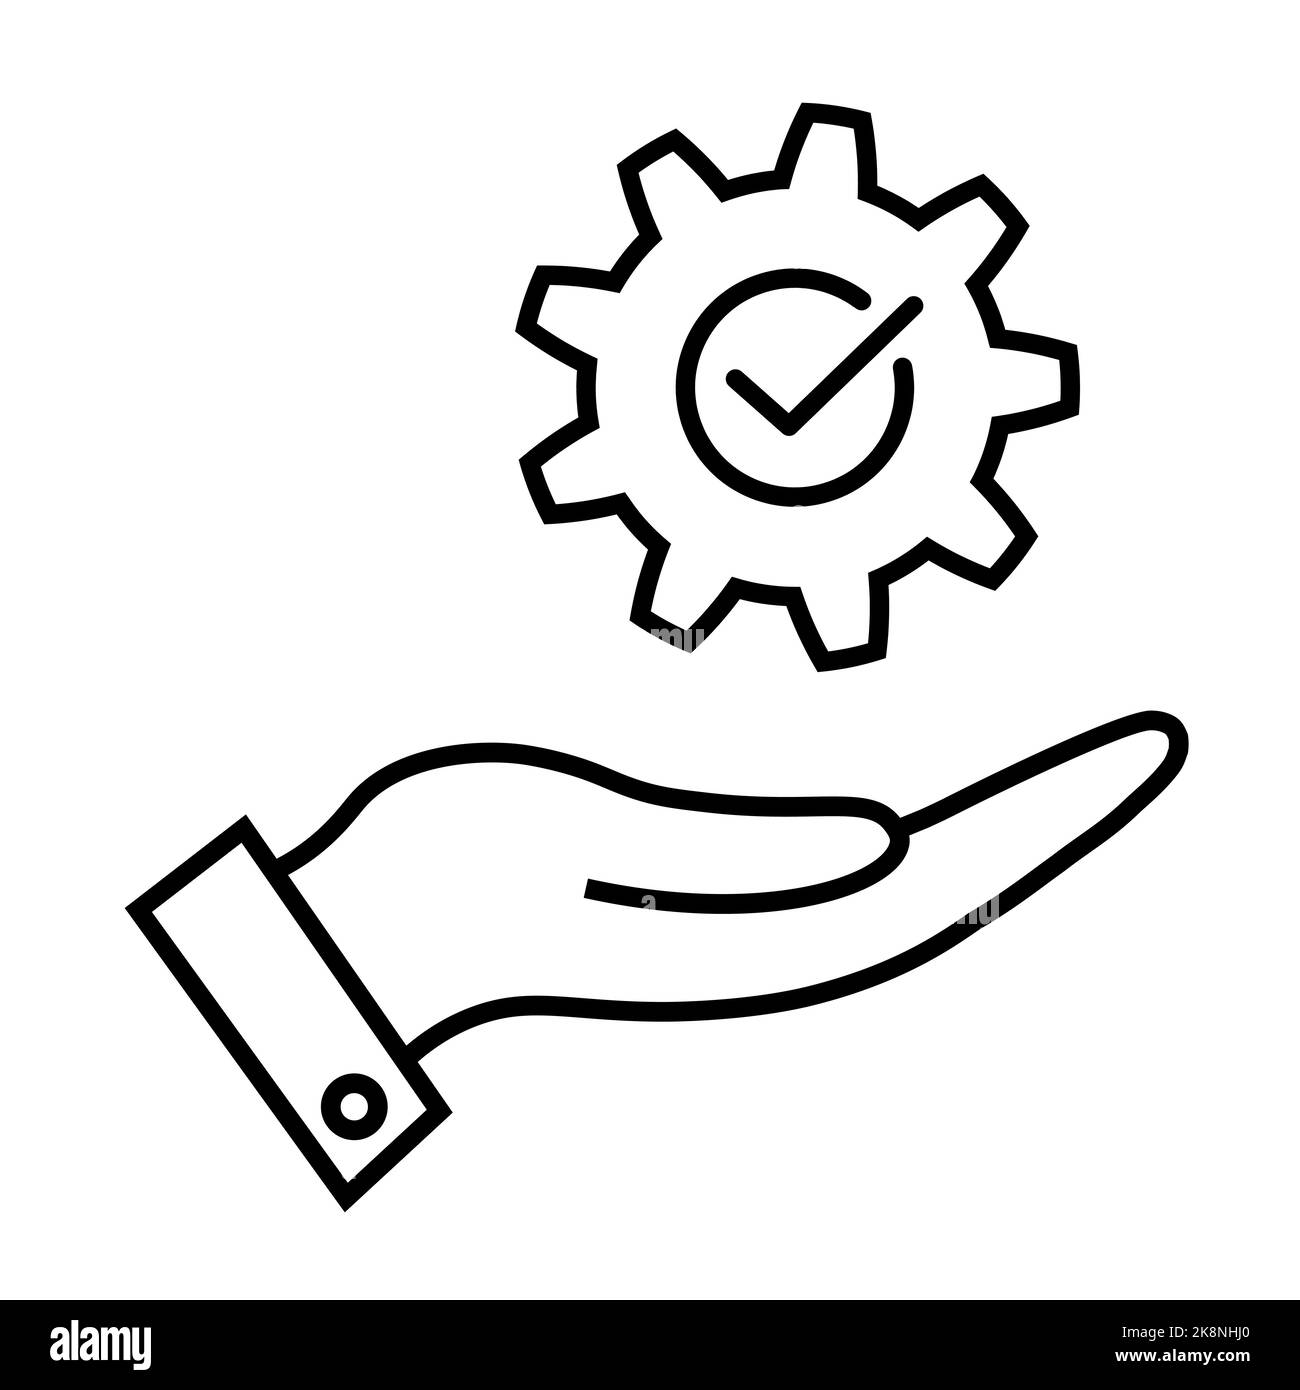 Cog with check mark on hand line icon in flat. Successful process symbol on white. Success sign with cog on hand. Execution, progress, development ico Stock Vector